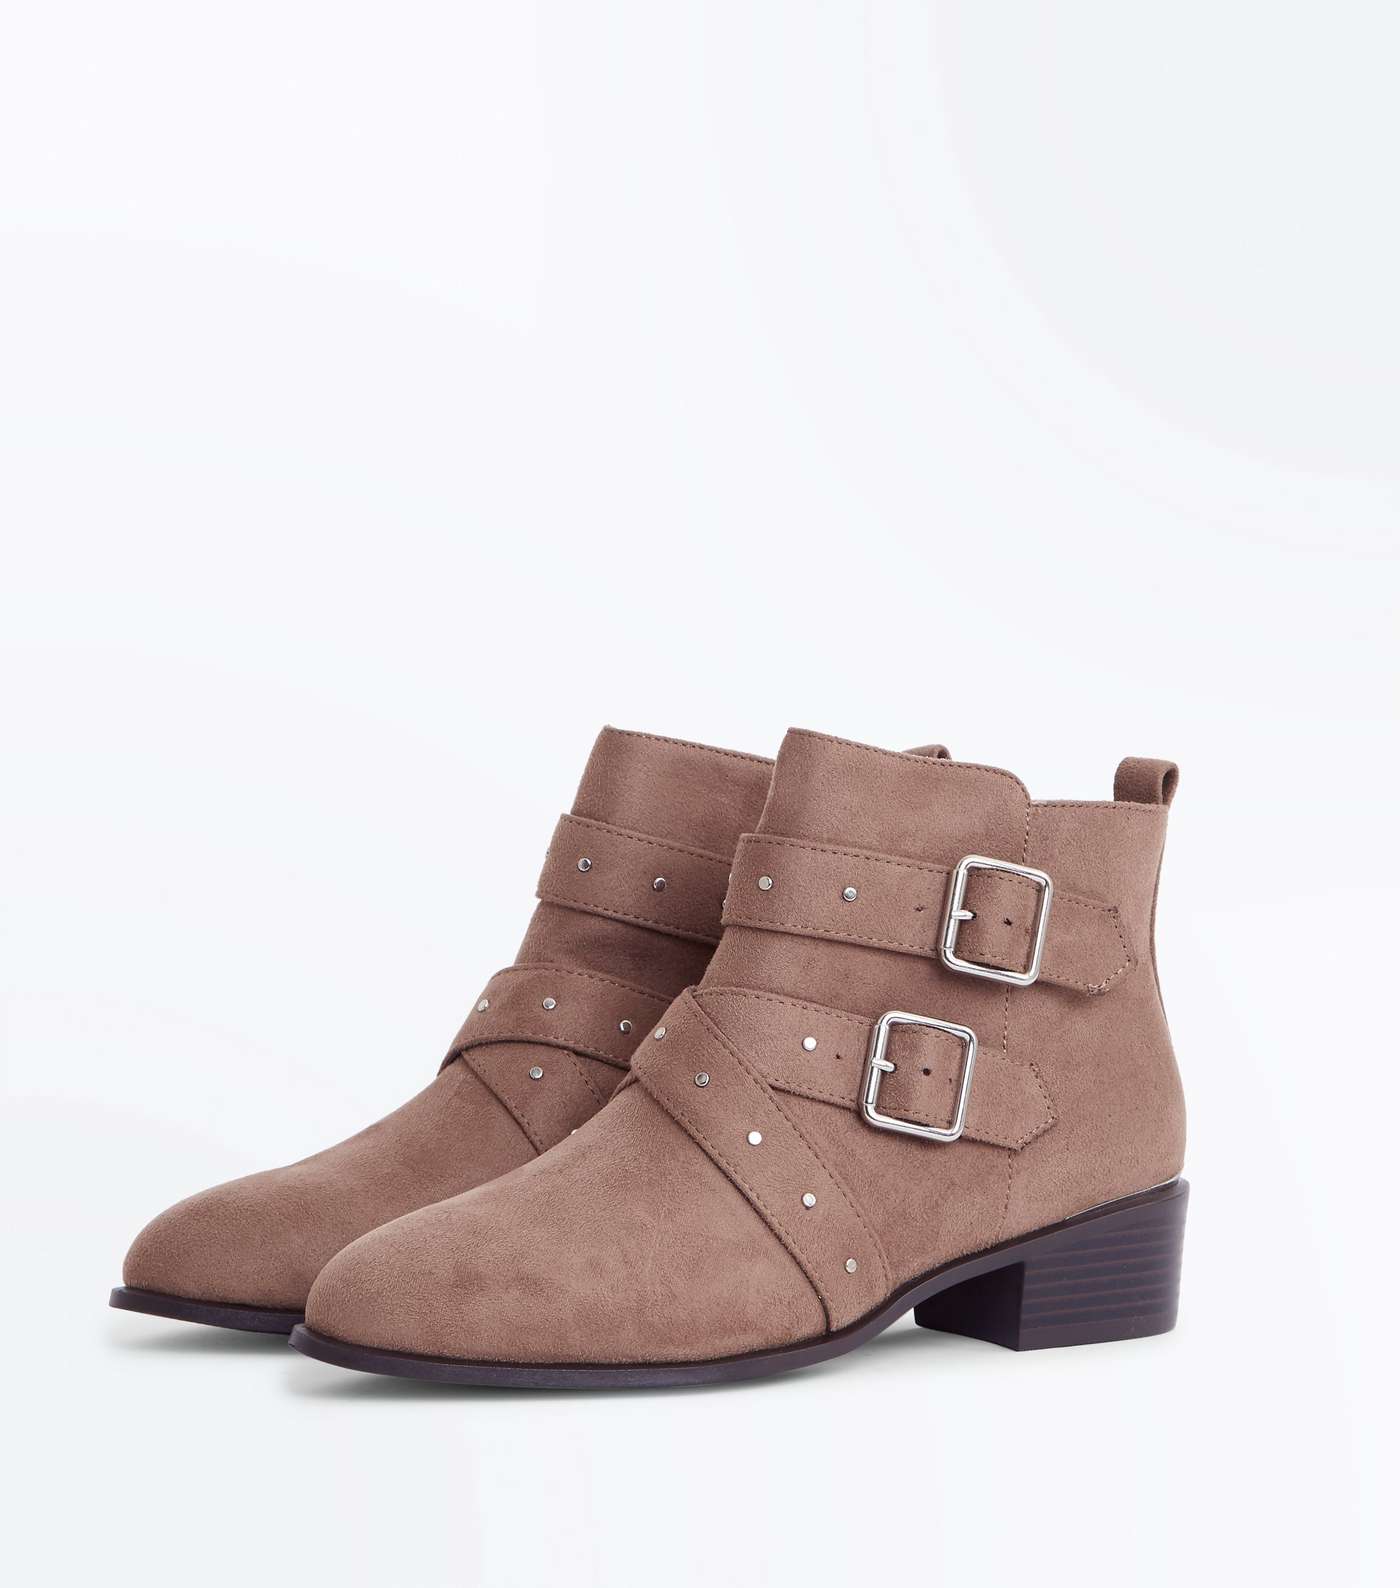 Wide Fit Light Brown Suedette Stud Strap Ankle Boots Image 3